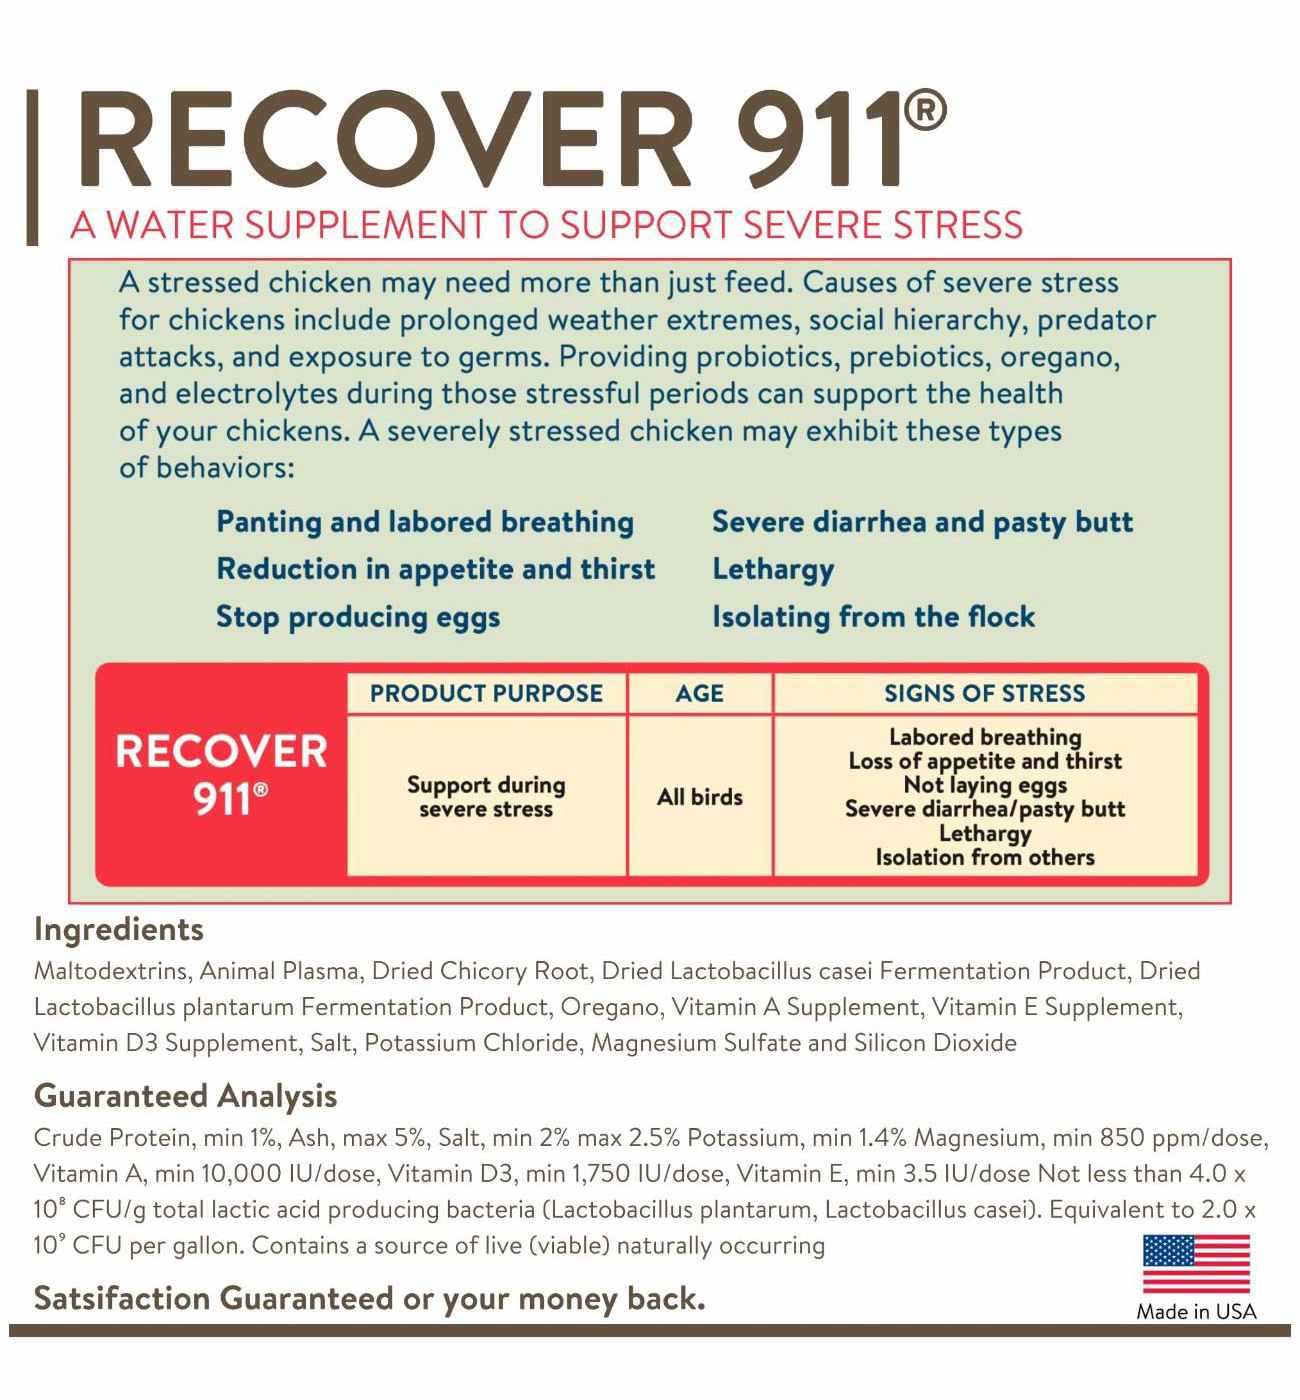 Flockleader Recover 911 Water Supplement; image 2 of 4